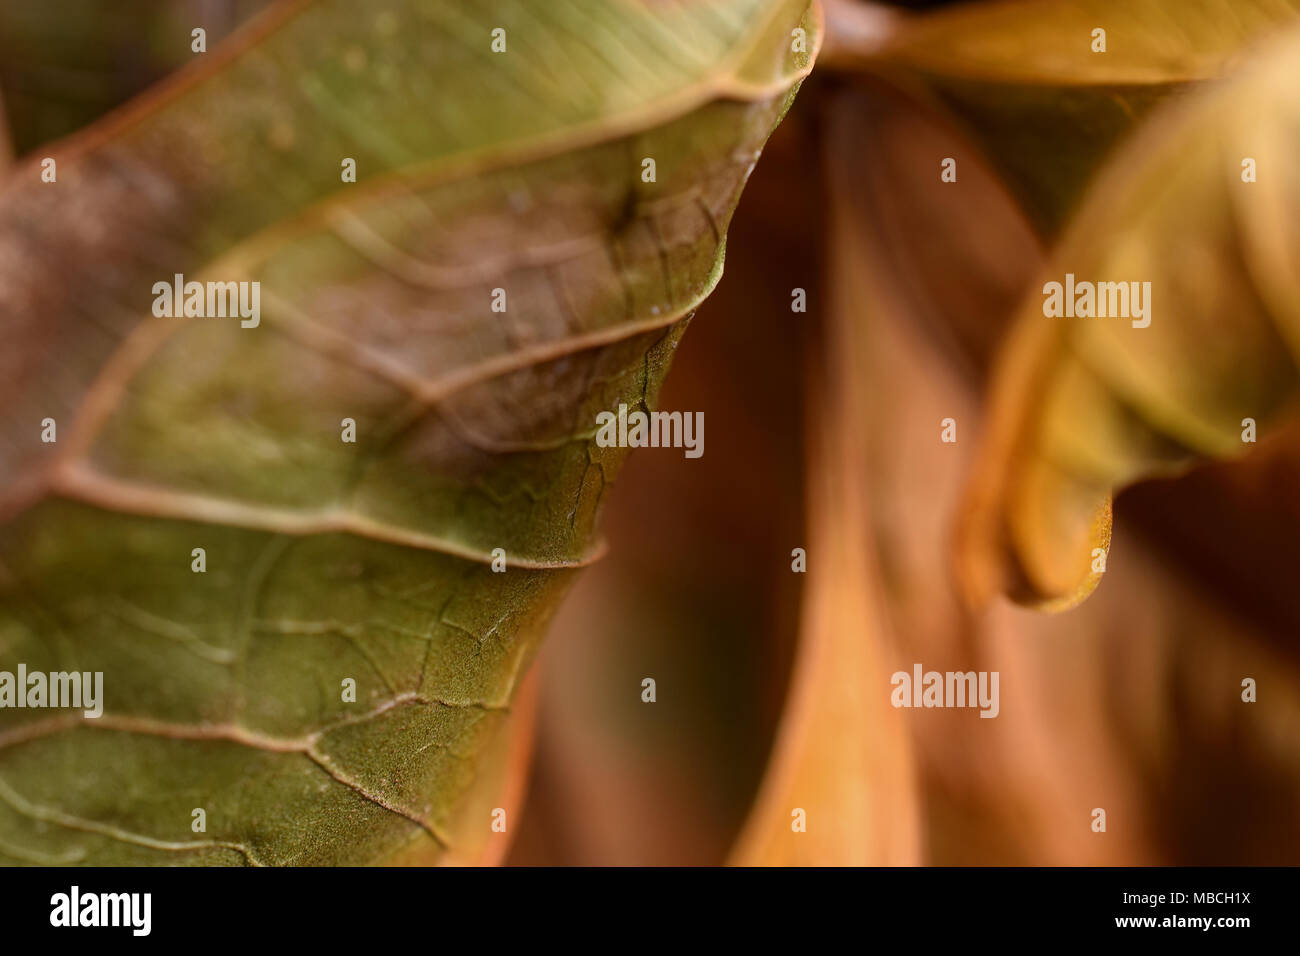 Leaves close up image as artistic nature background. Selective focus on foreground. Stock Photo